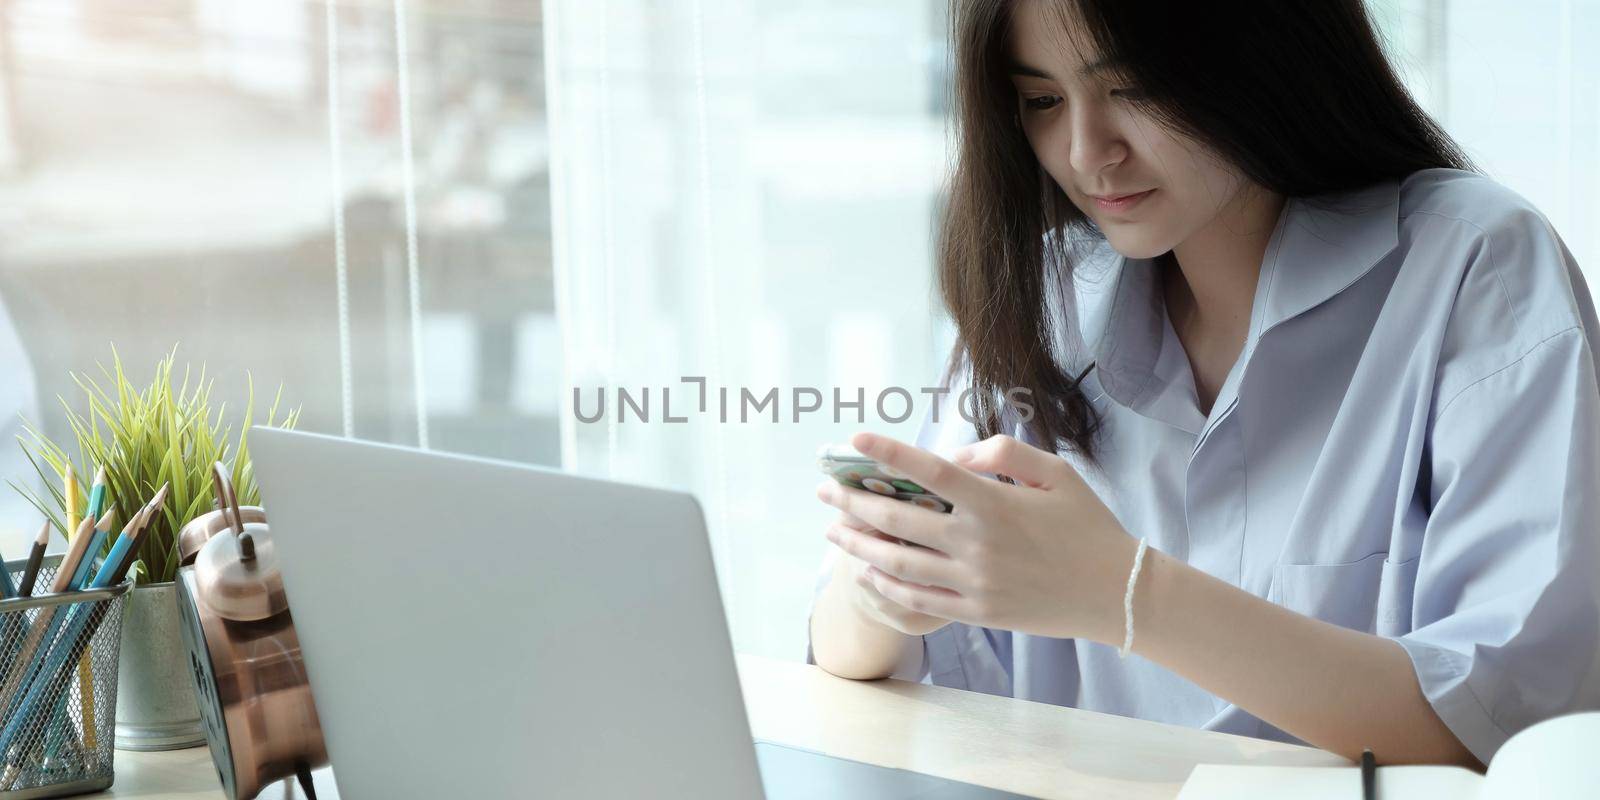 Portrait of woman using smartphone and smiling
